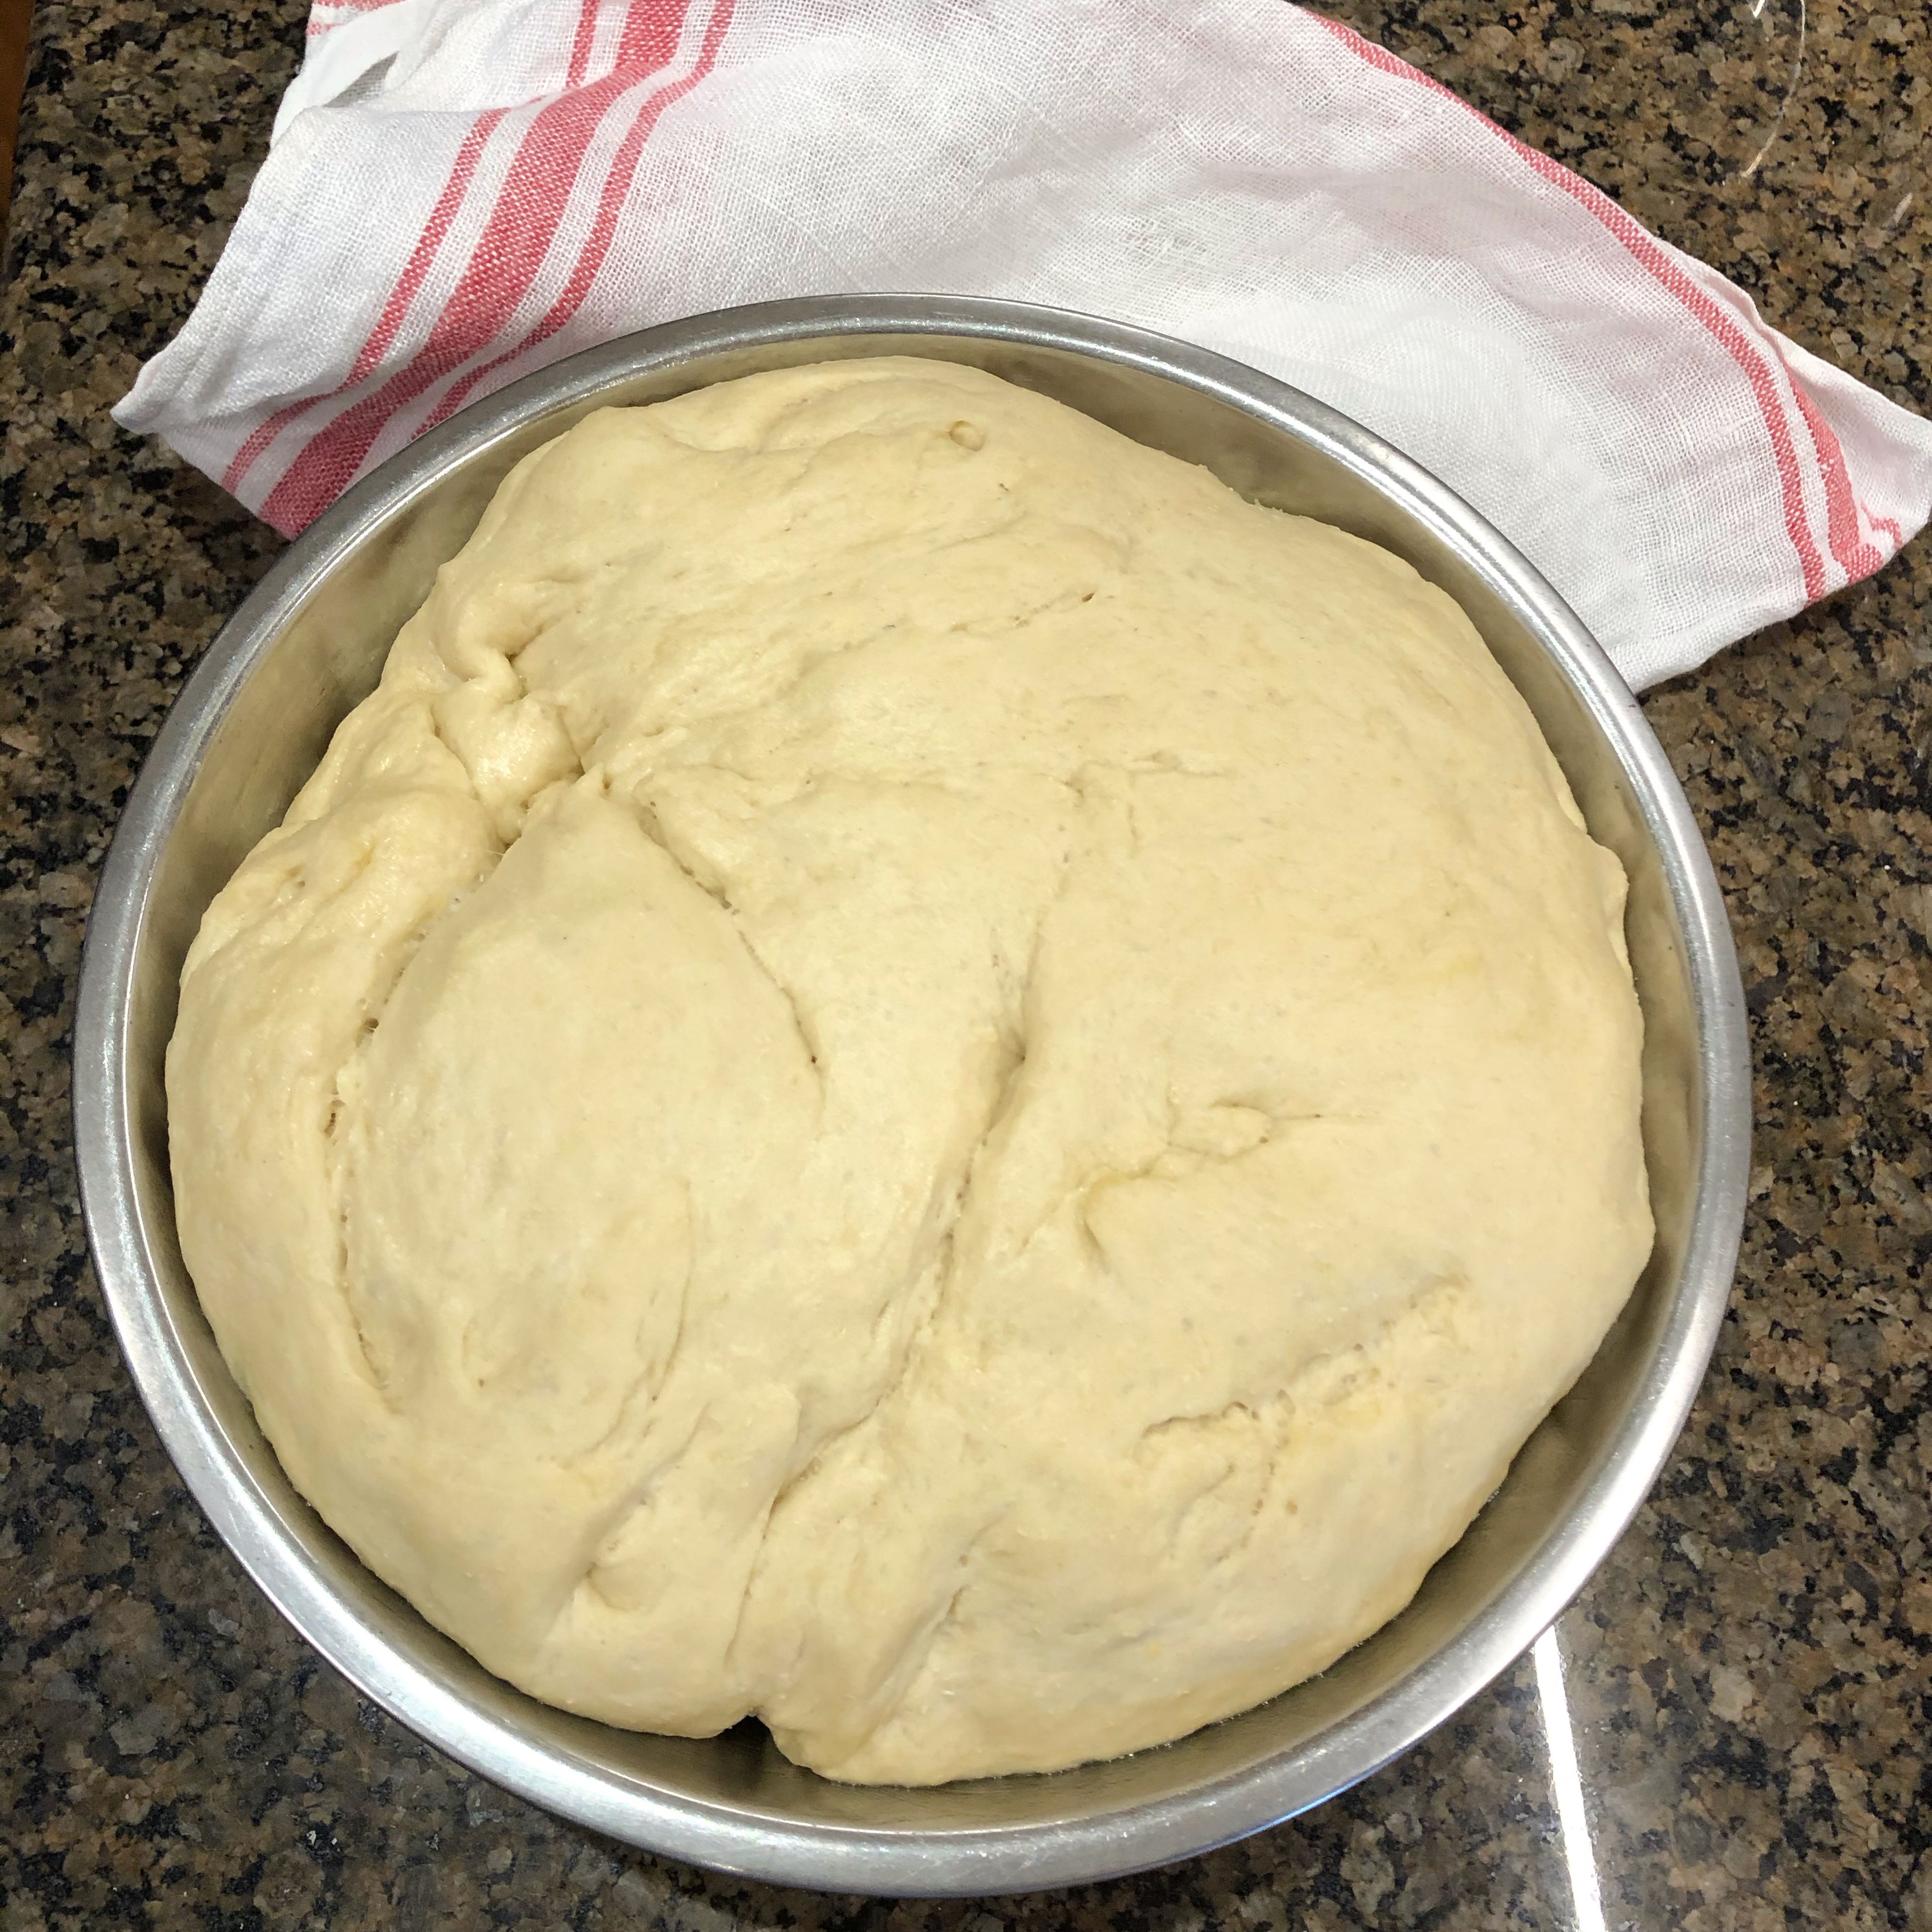 When dough is risen, punch down gently in bowl and then remove from bowl and place on clean counter.